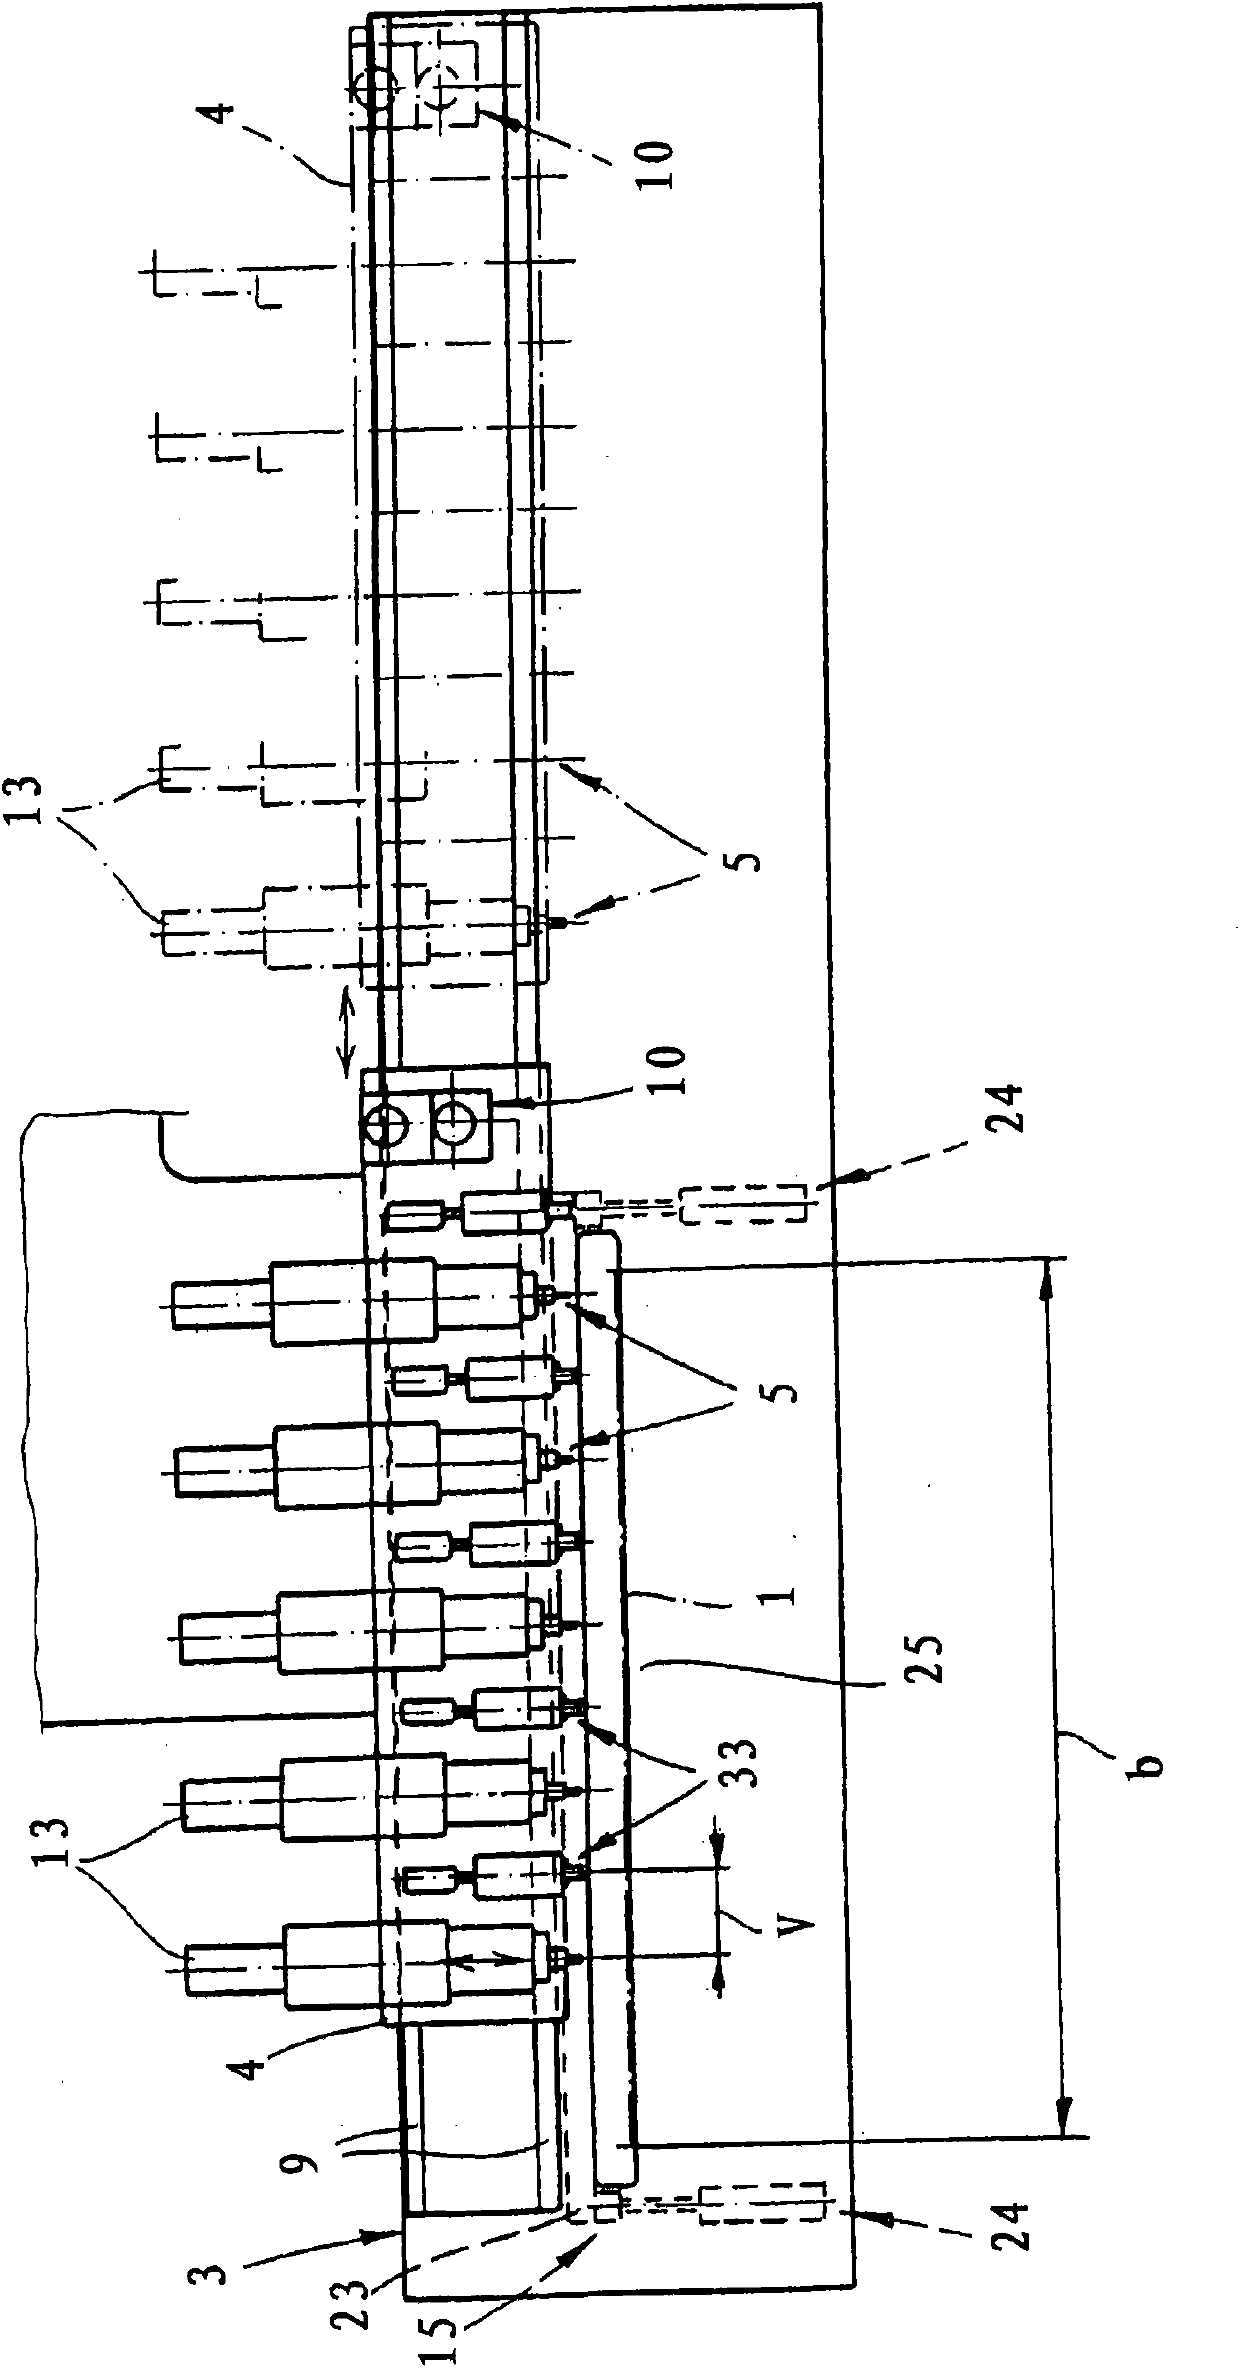 Method of and device for connecting metal bands